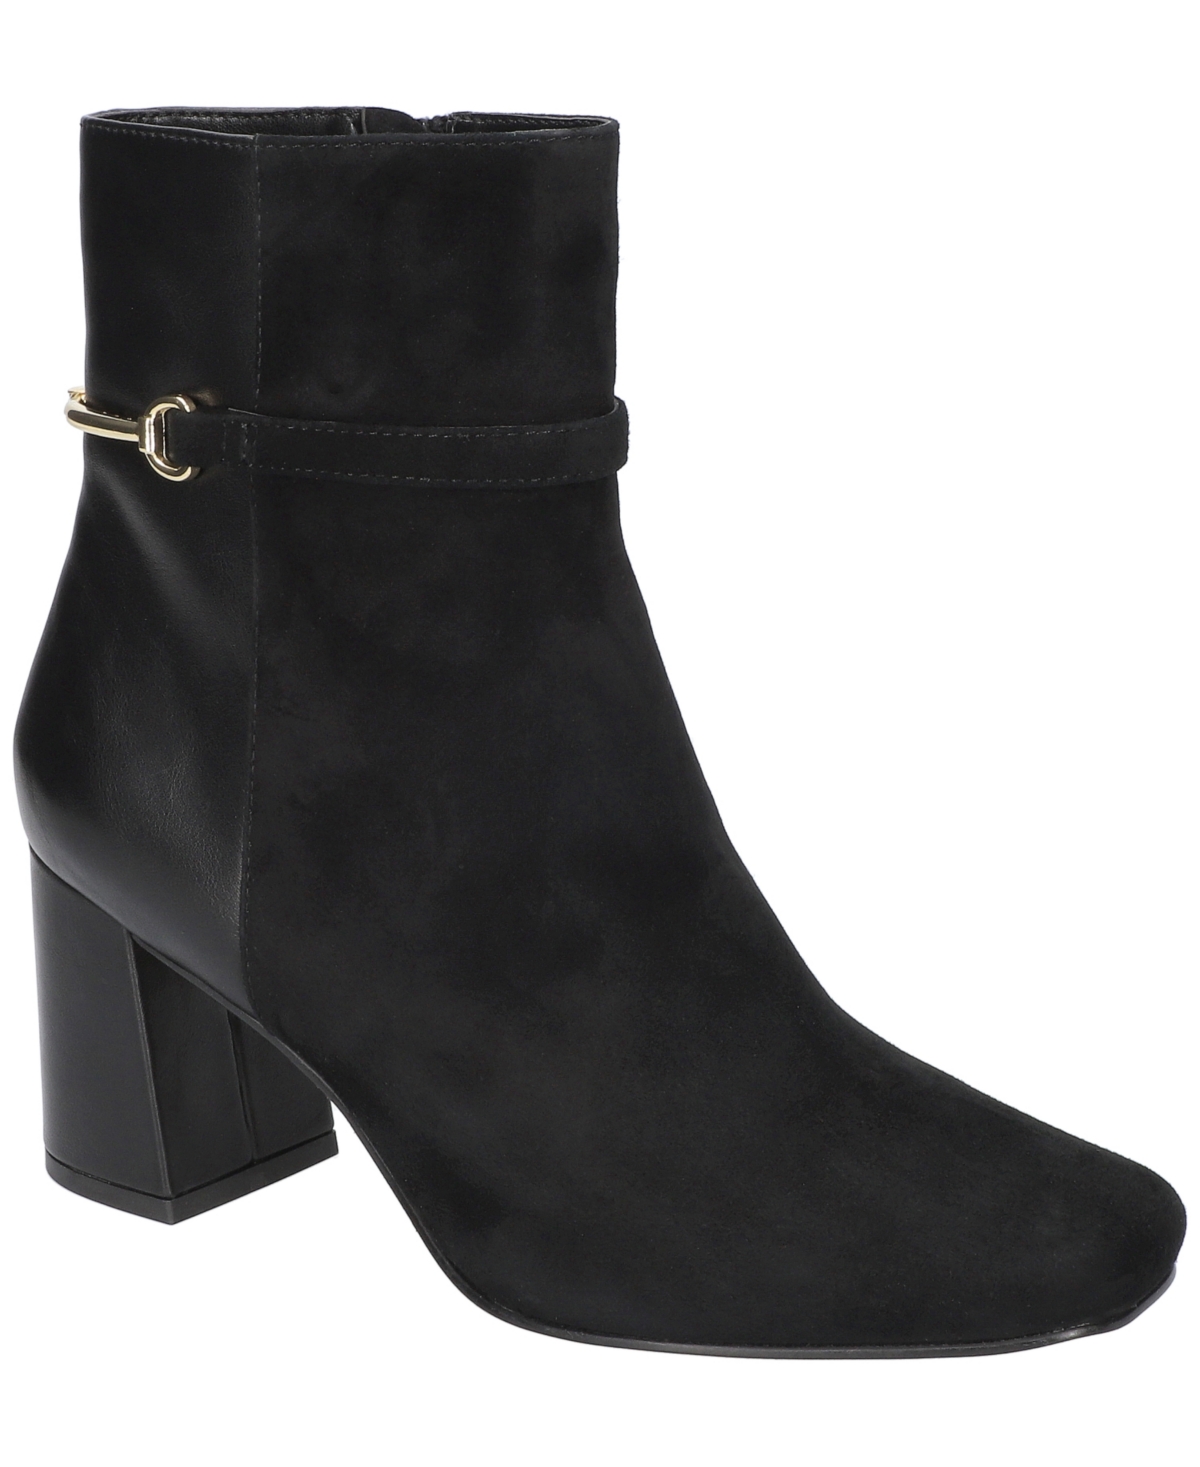 Women's Quincy Square Toe Ankle Boots - Almond Kidsuede Leather